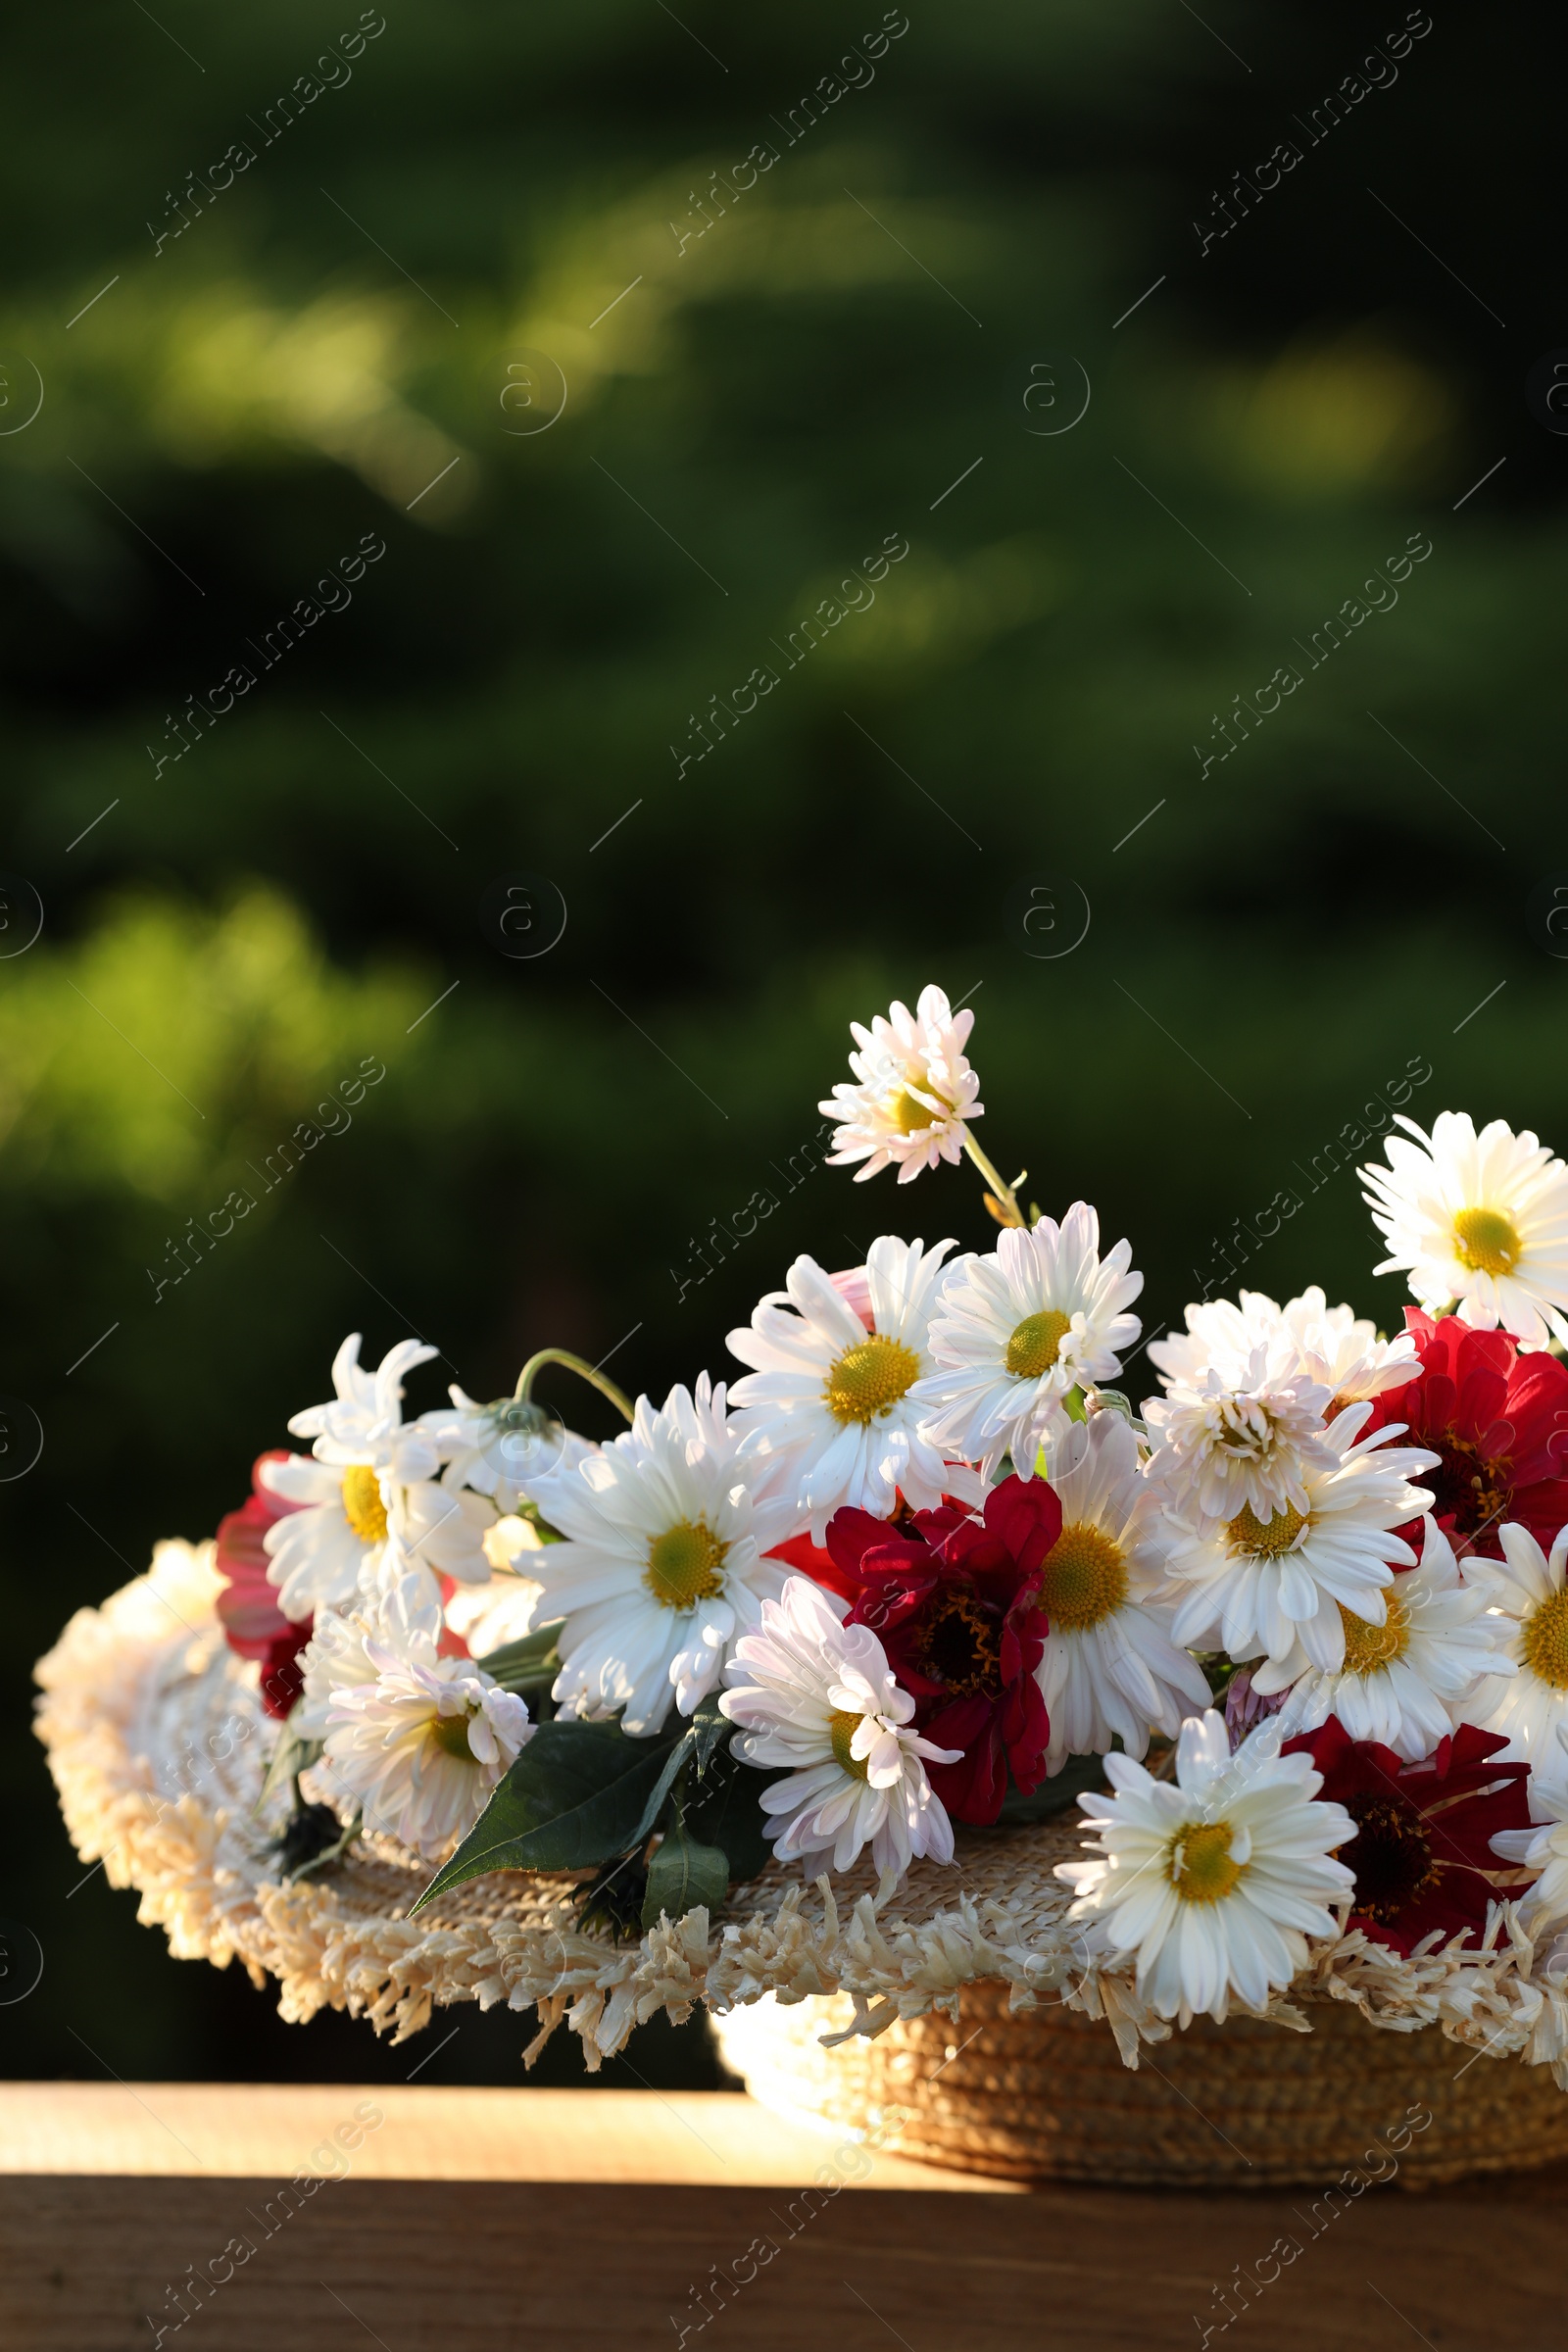 Photo of Beautiful wild flowers in wicker basket on wooden table against blurred background. Space for text